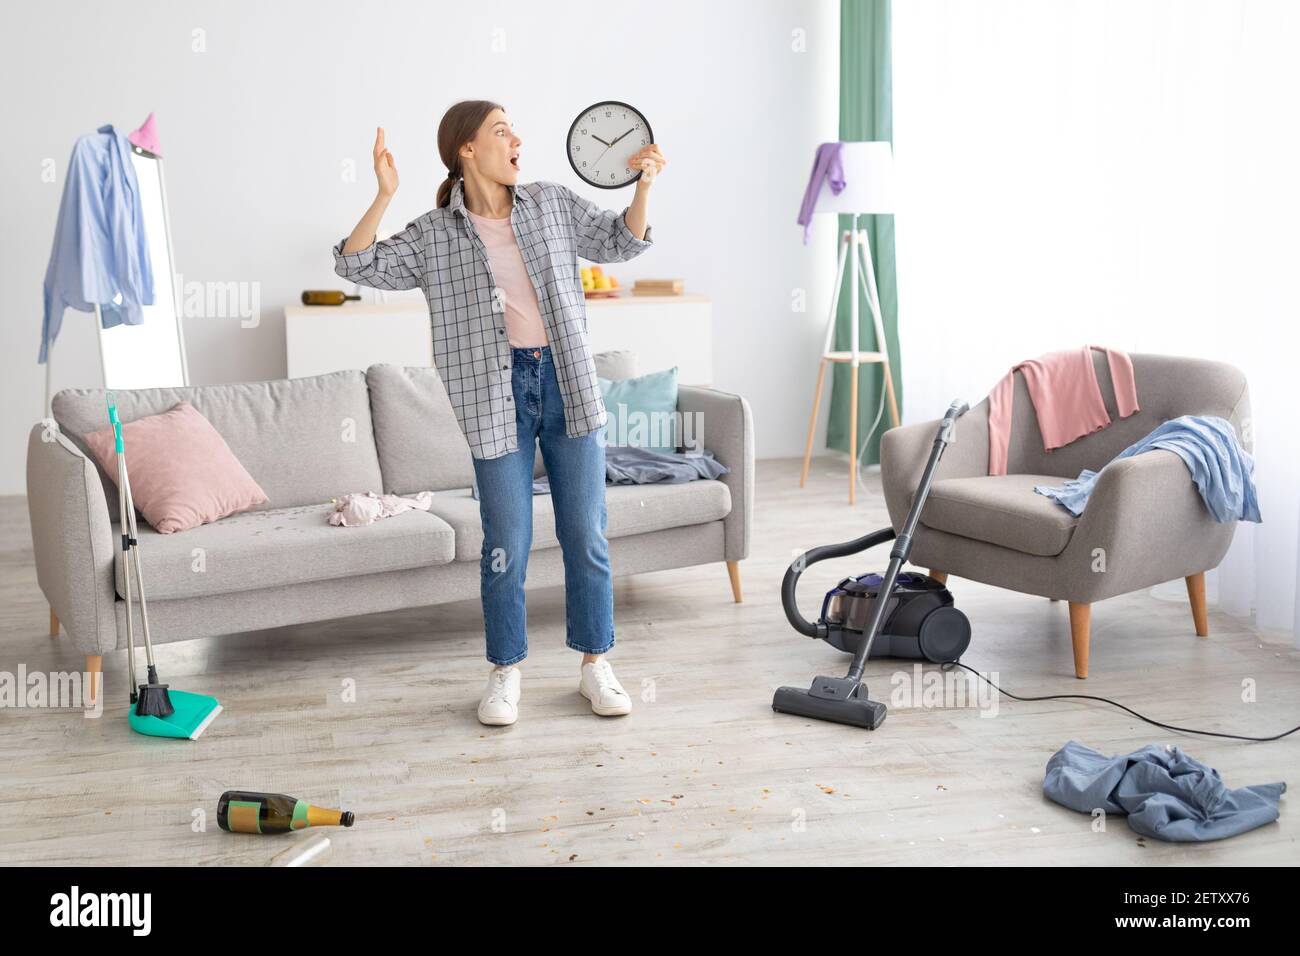 Shocked young woman holding clock, feeling terrified, standing in messy room after party, being late to clean apartment Stock Photo